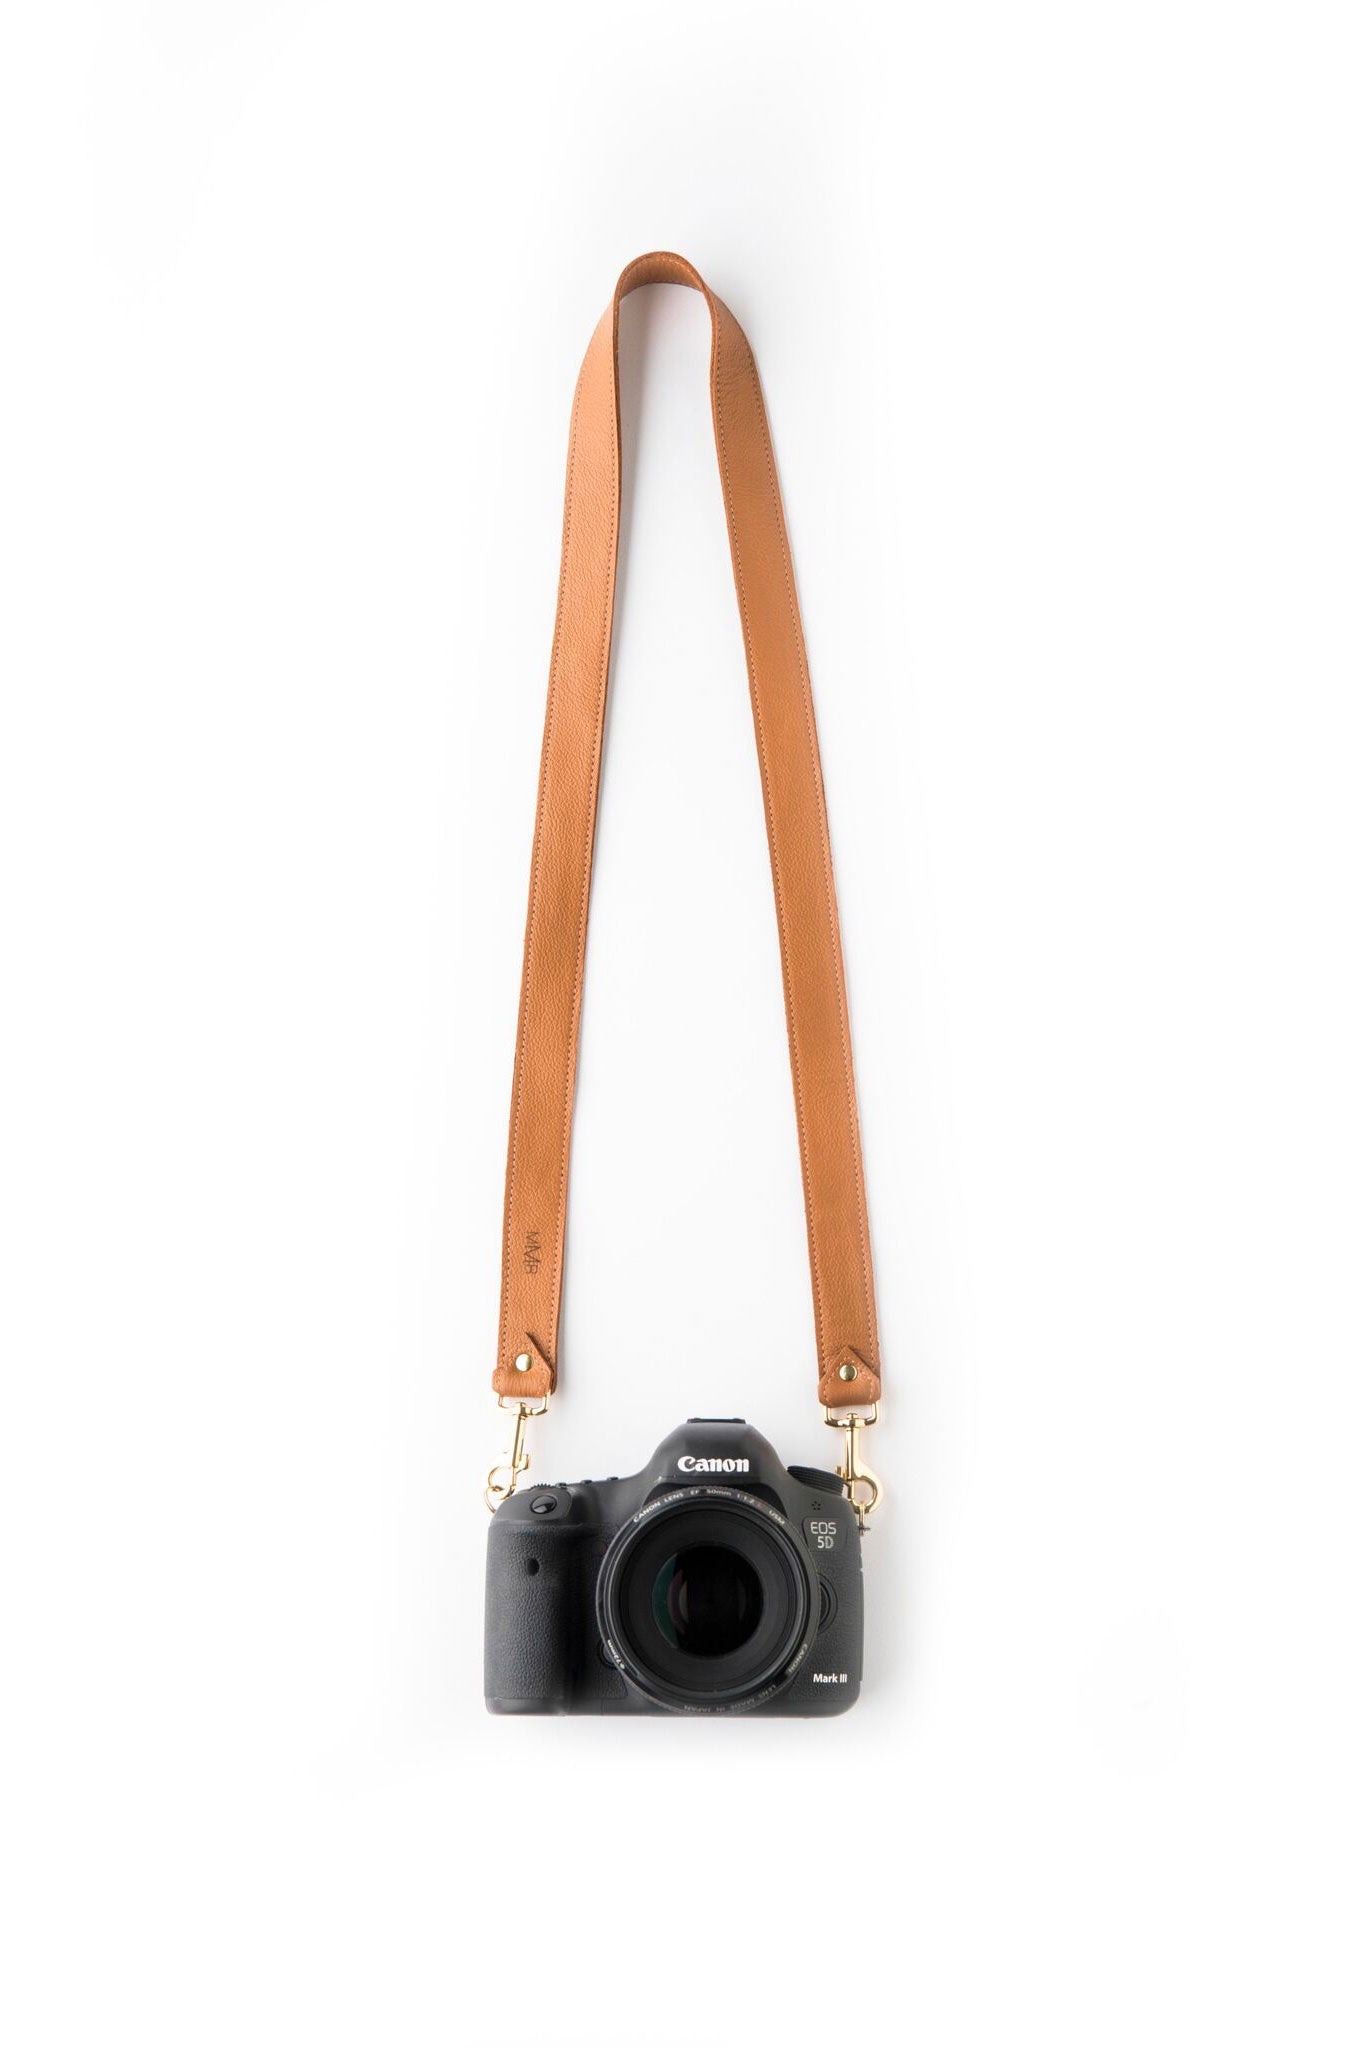 FOTO | The Designer in Saddle - a saddle brown genuine pebbled leather camera strap that can be personalized with a monogram or business logo, making this leather camera strap the perfect personalized gift.